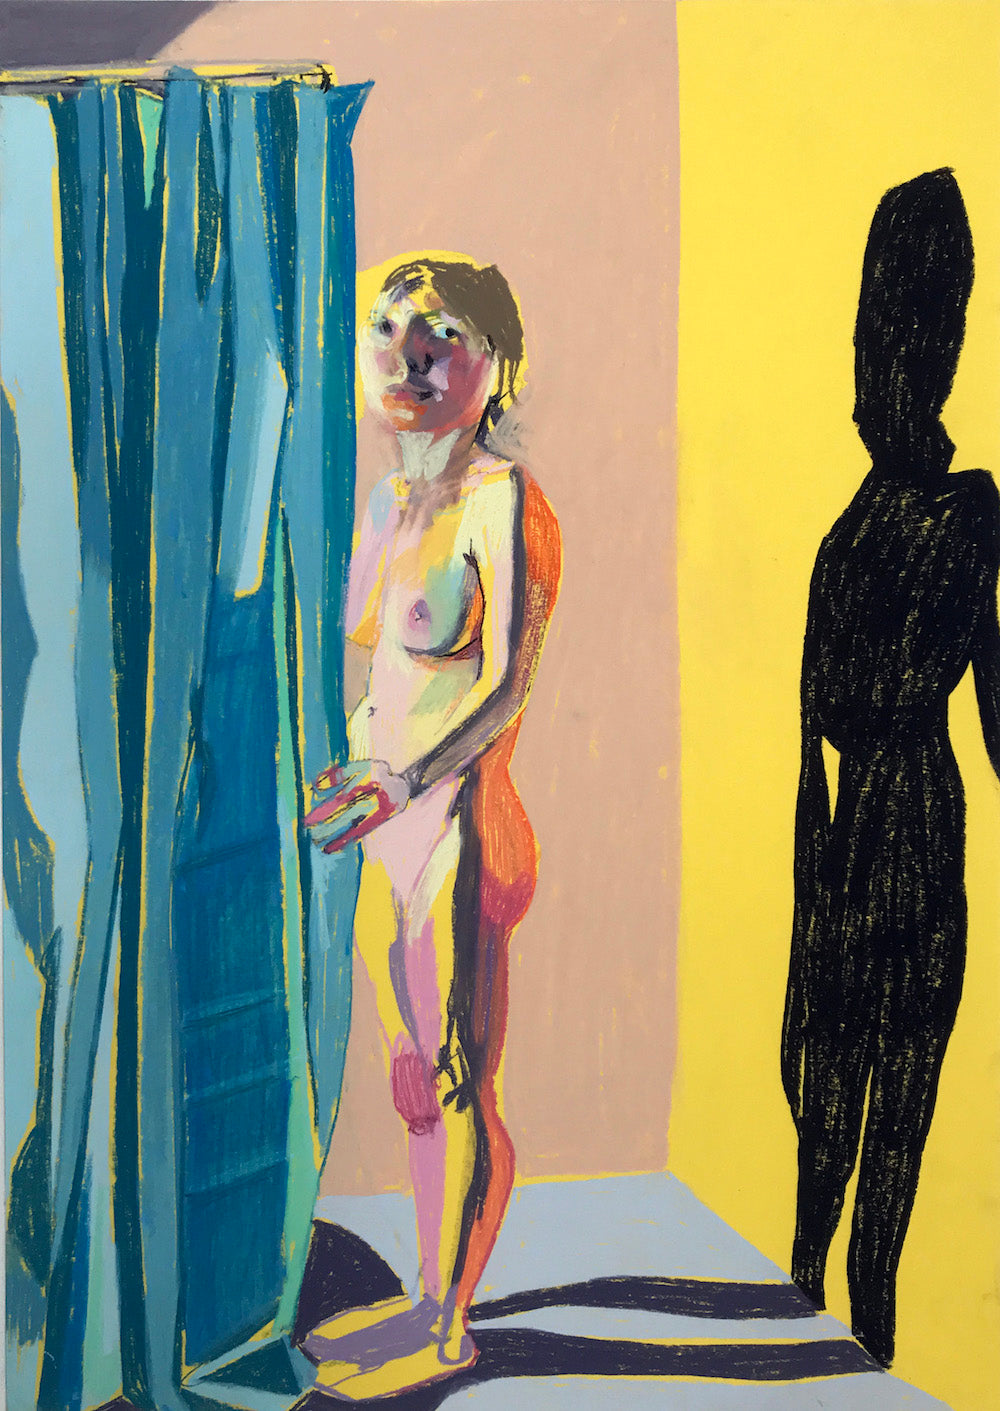 Standing Nude on Yellow with Blue Curtain